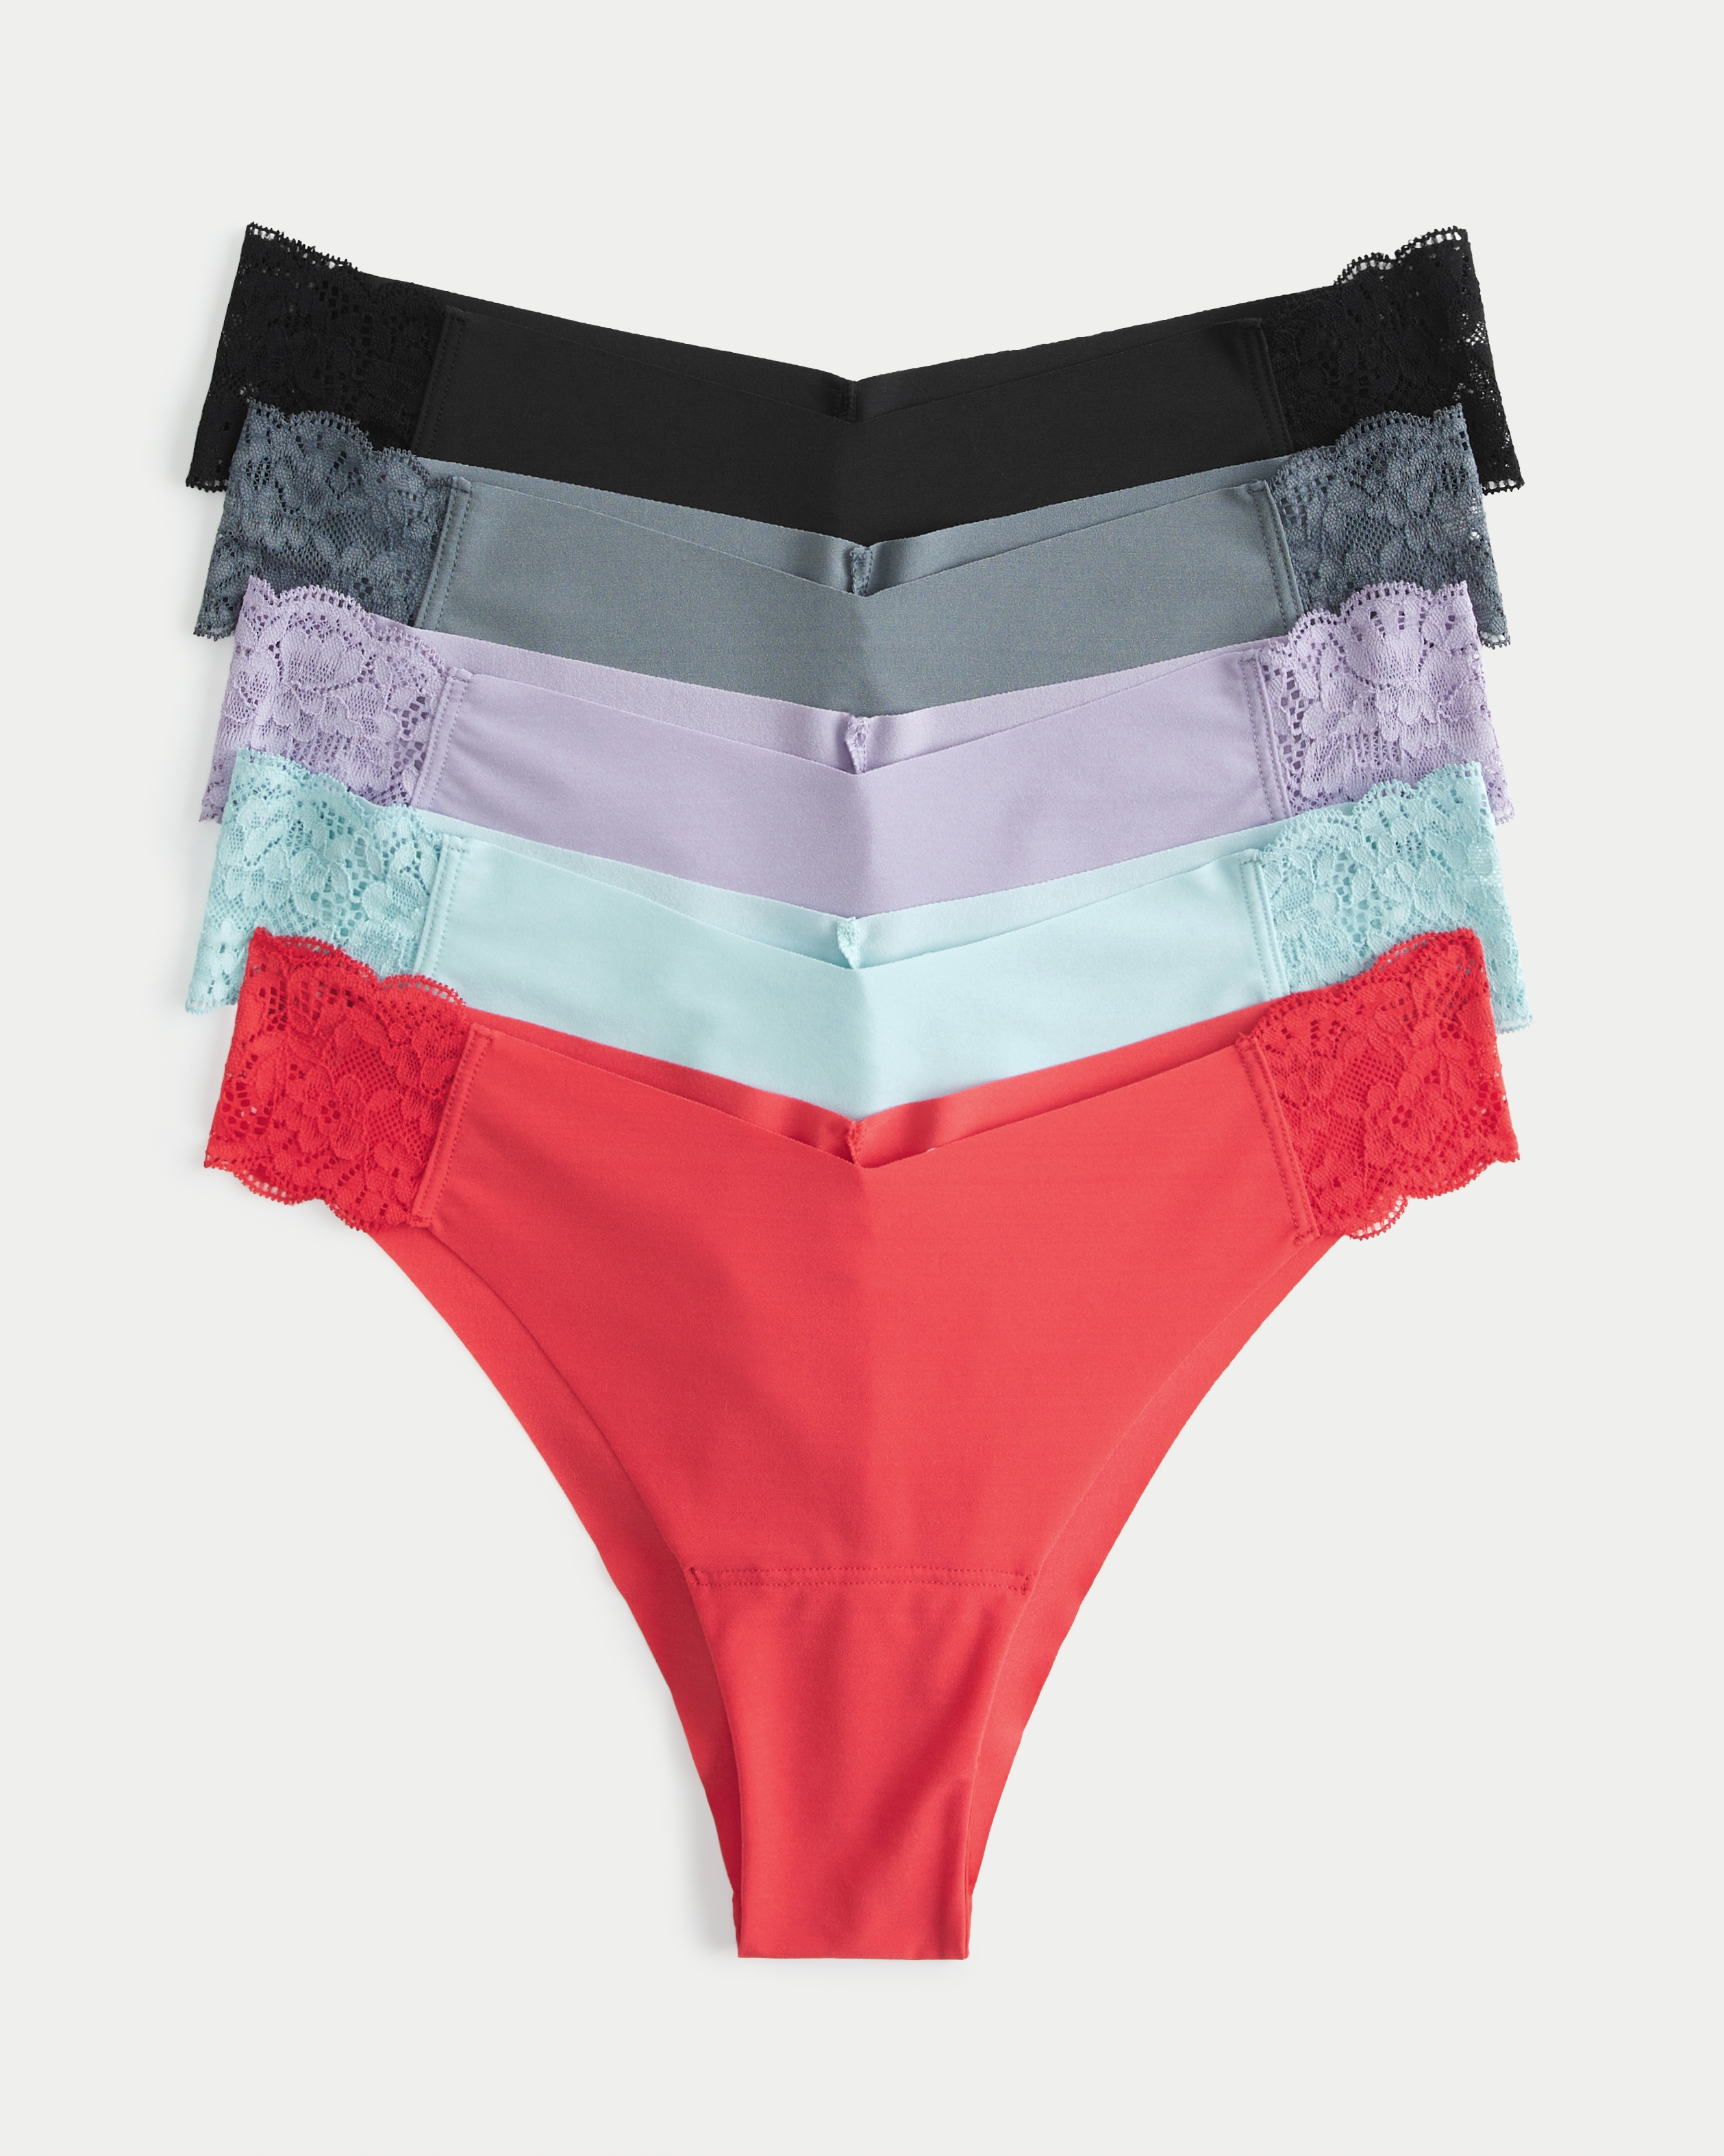 Gilly Hicks Lace-Side No-Show Cheeky Underwear 5-Pack